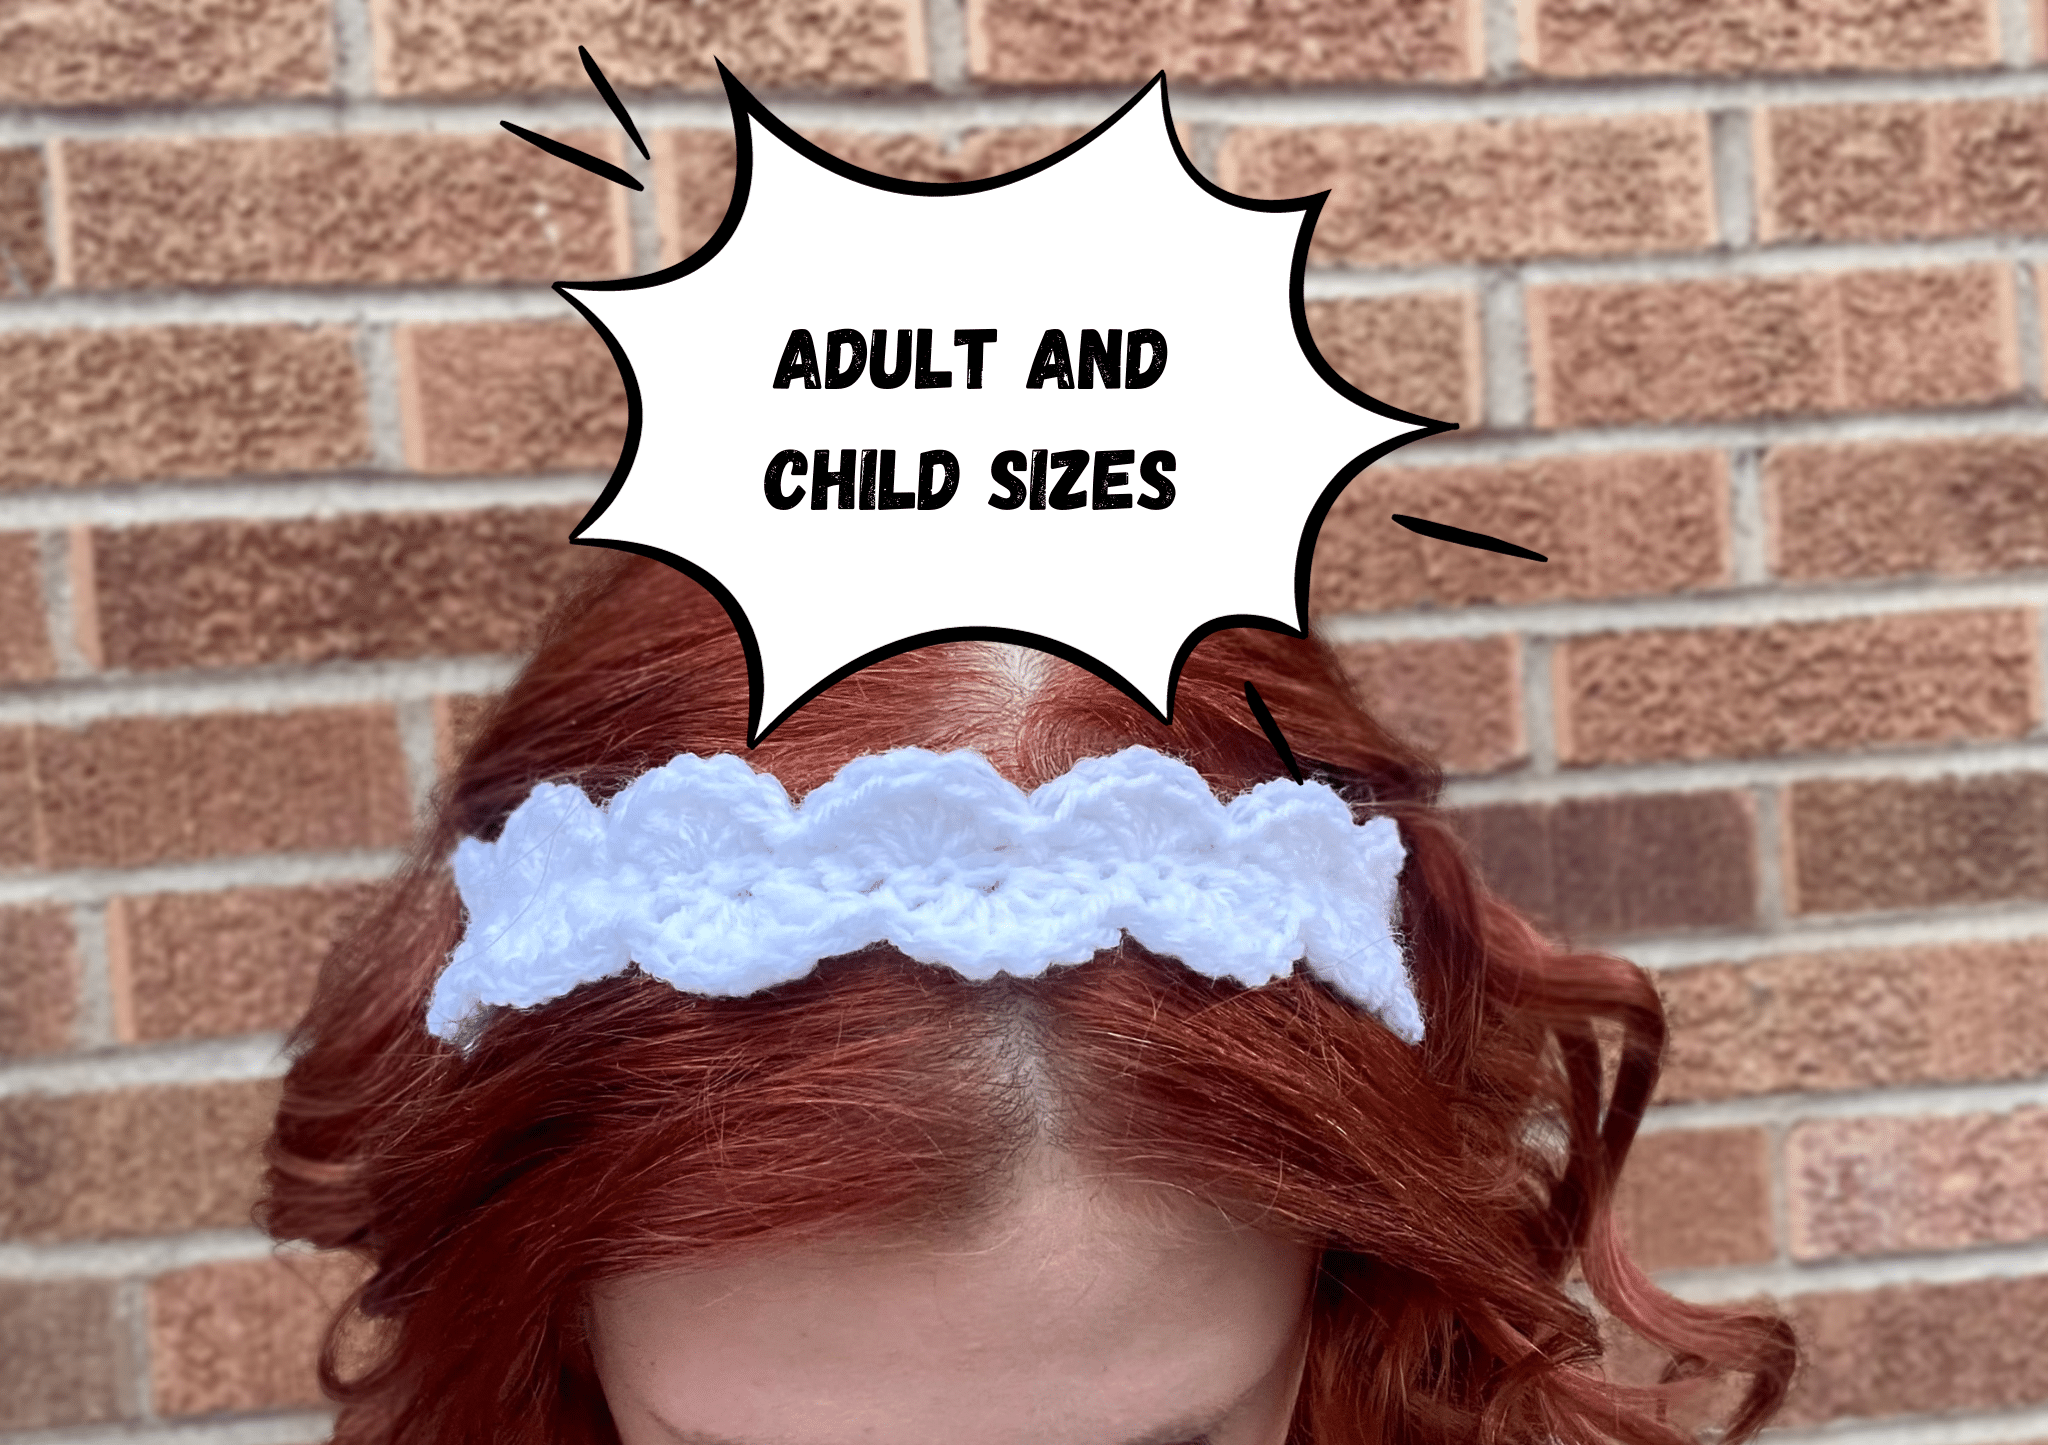 Cloud Headband with Adult and Child Sizes text